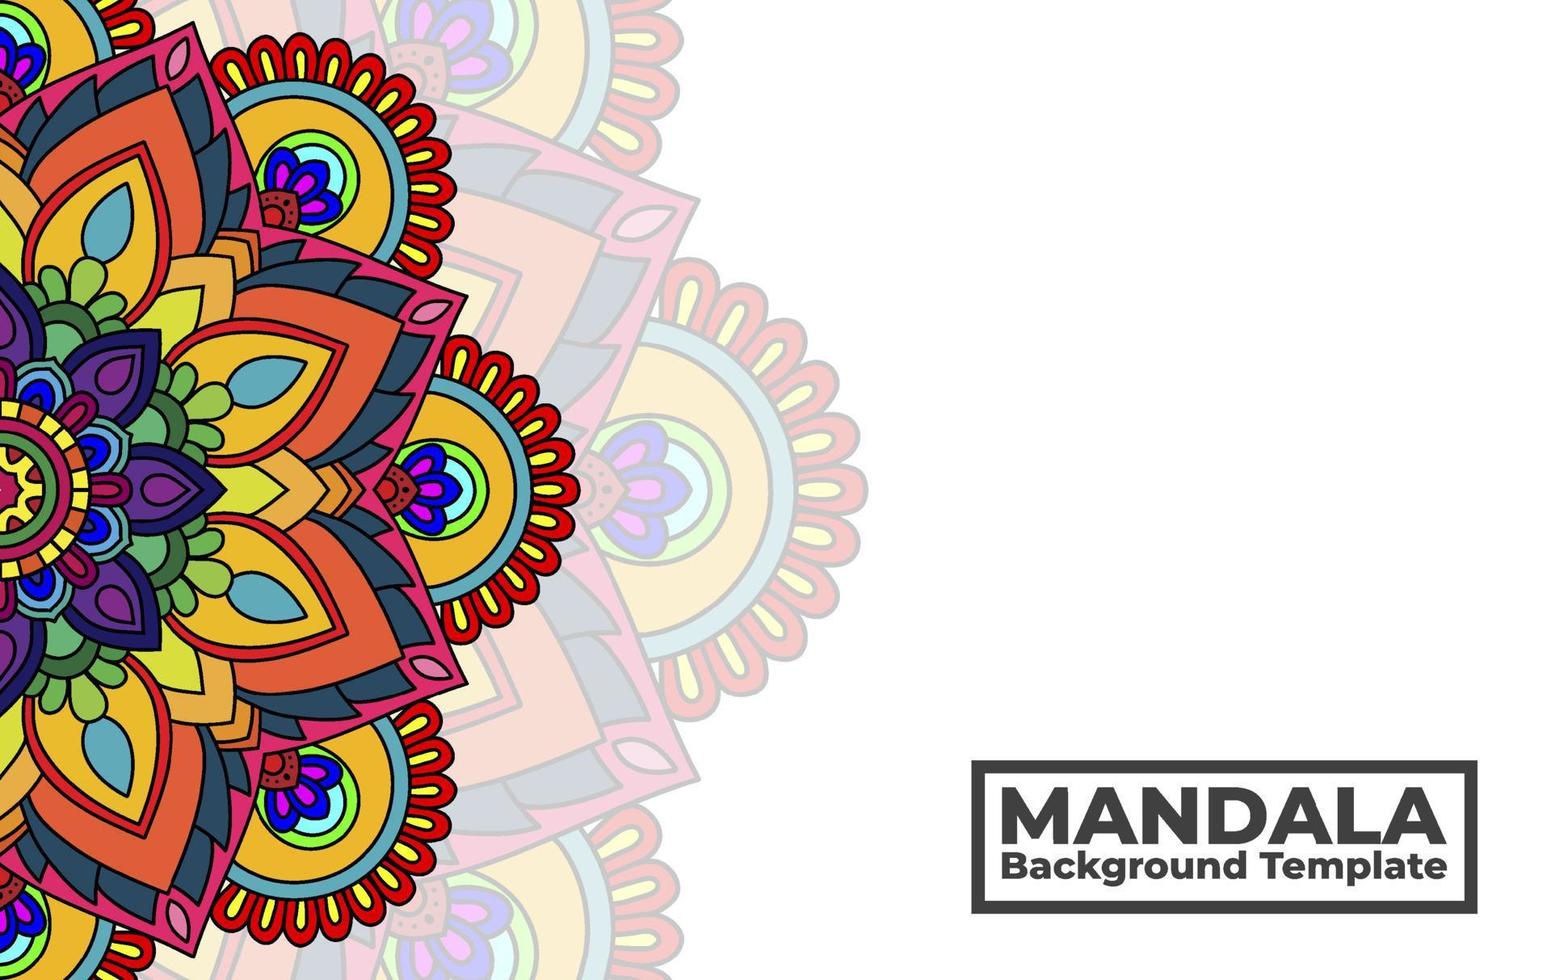 Vector background template with ornamental mandala pattern design, Decorative flower mandala banner with place for texts